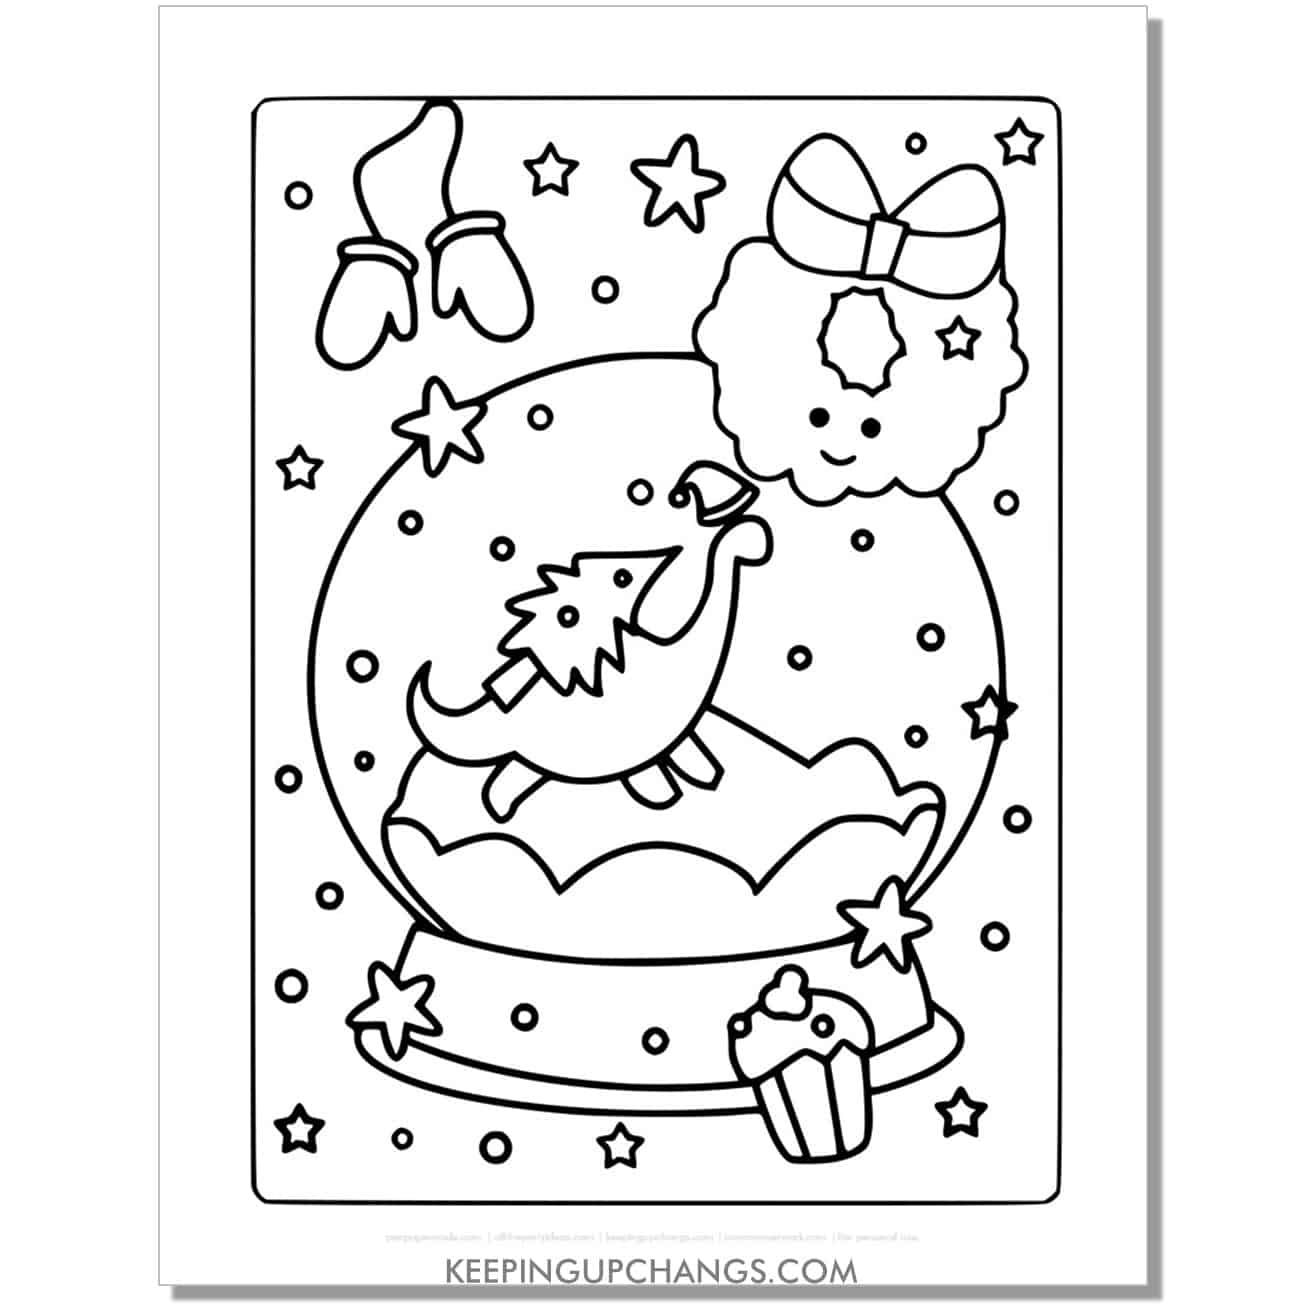 free full size snow globe christmas dinosaur coloring page.